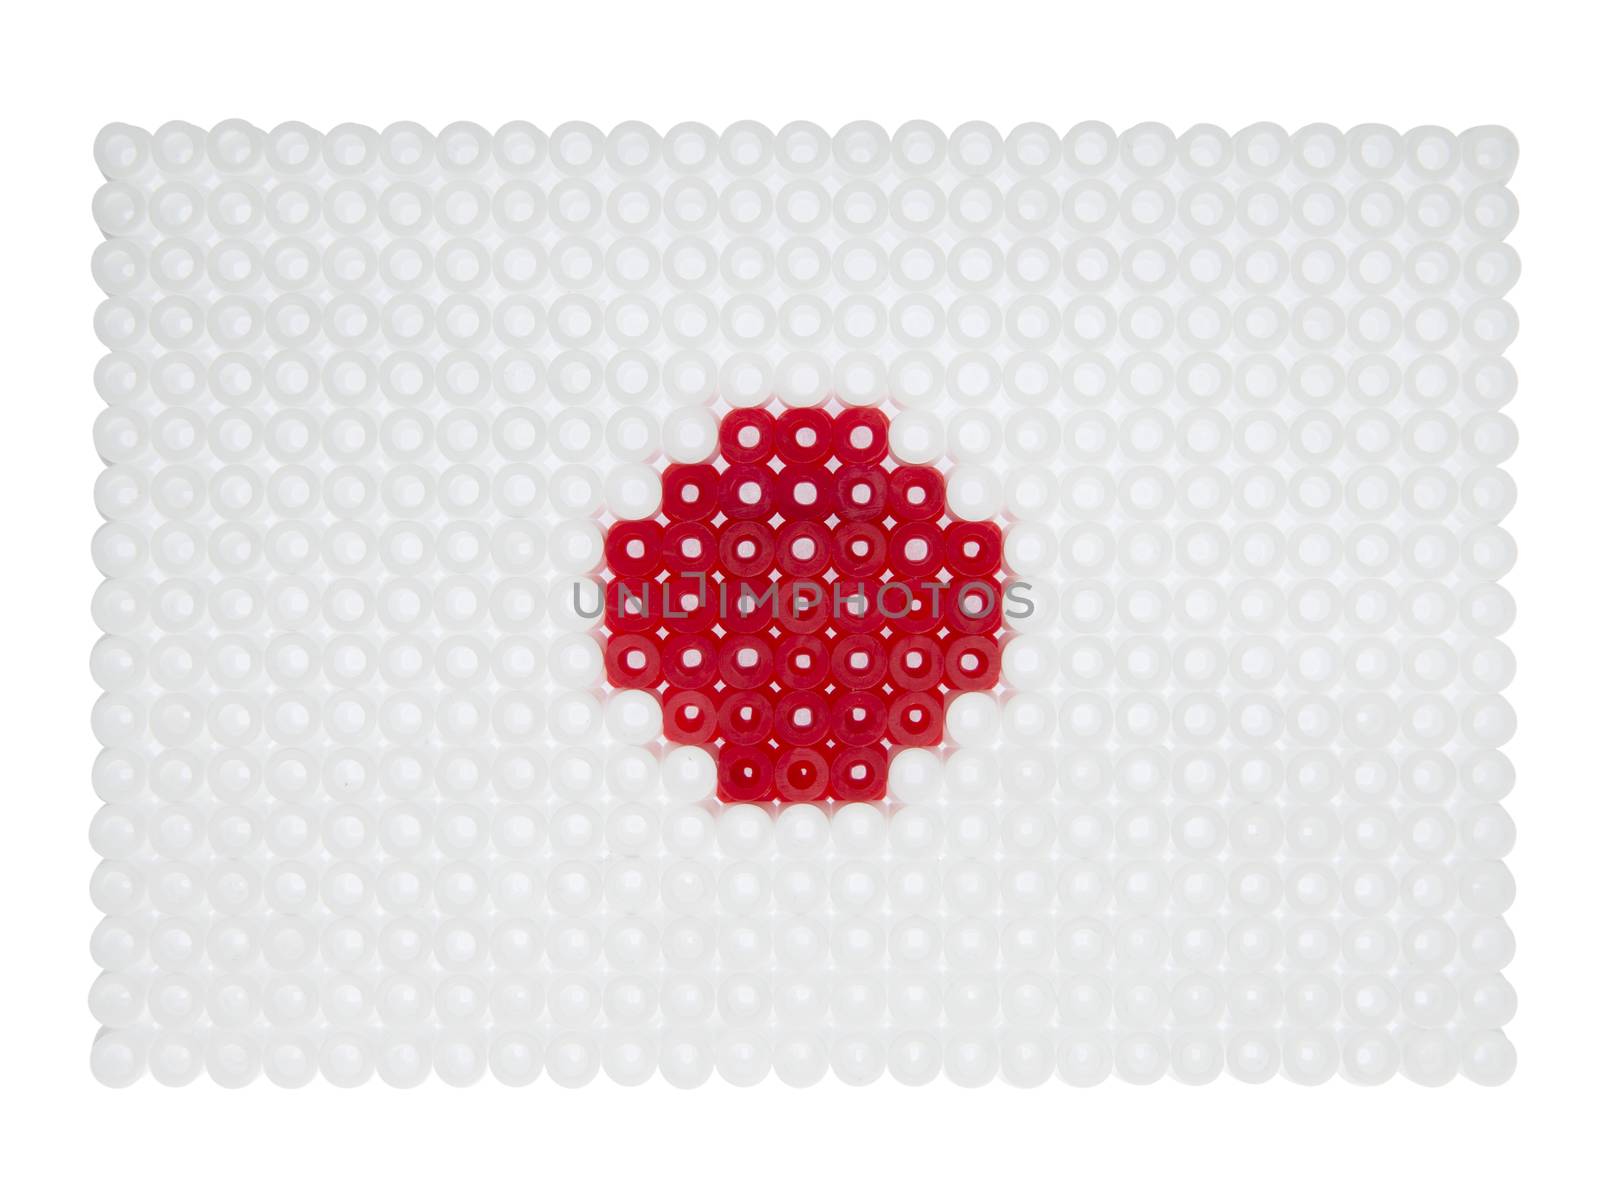 Japanese Flag made of plastic pearls